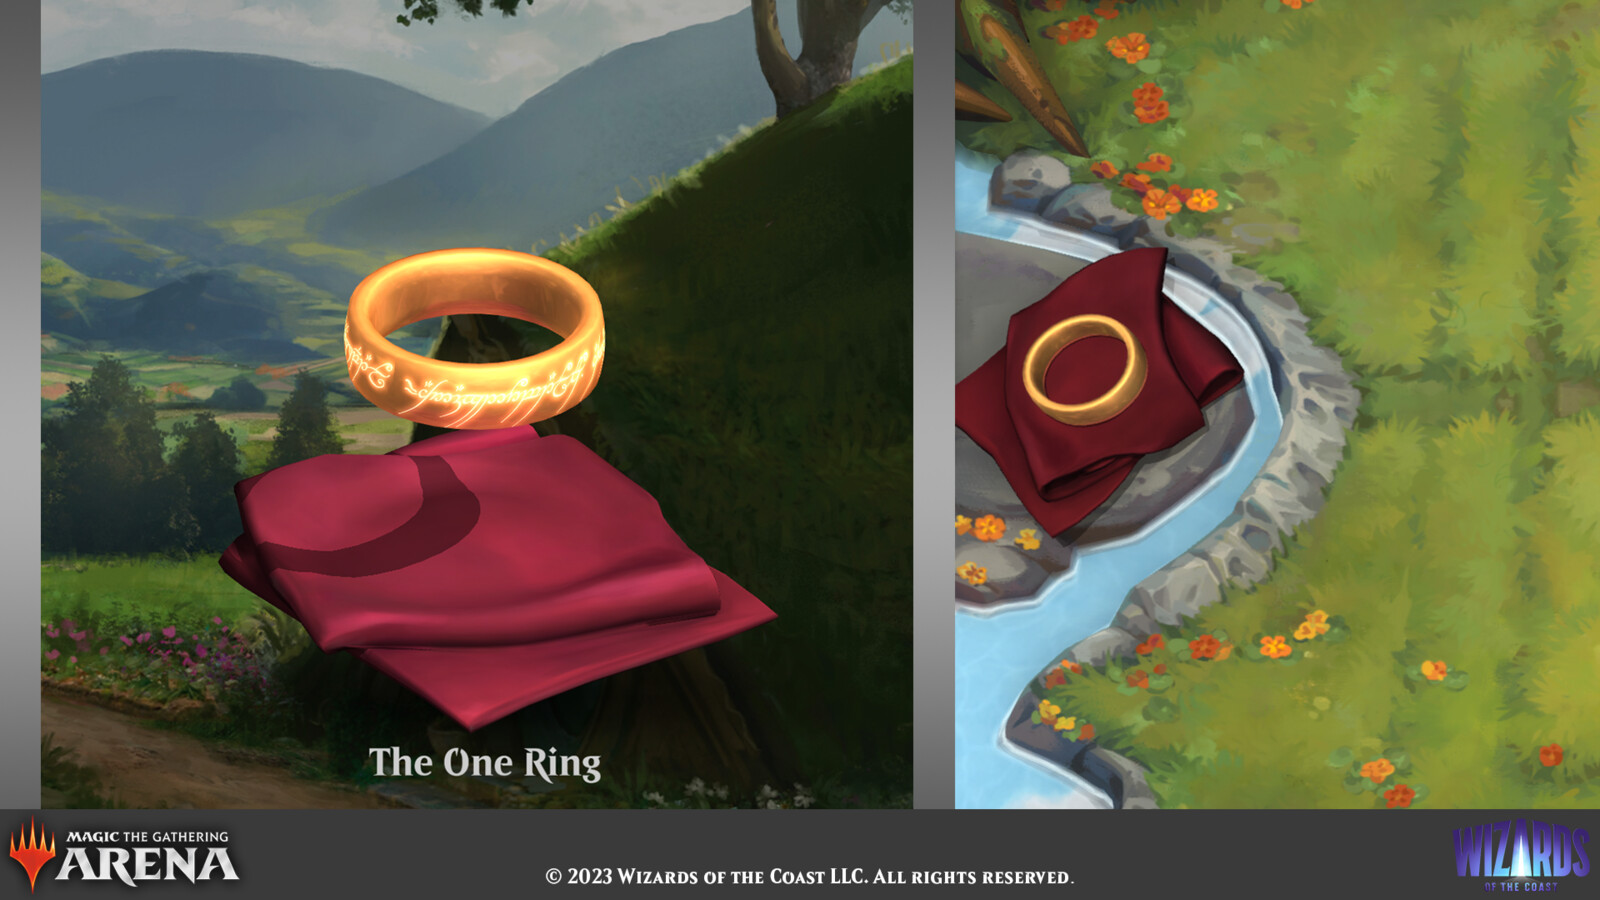 Select pet and game views for The One Ring